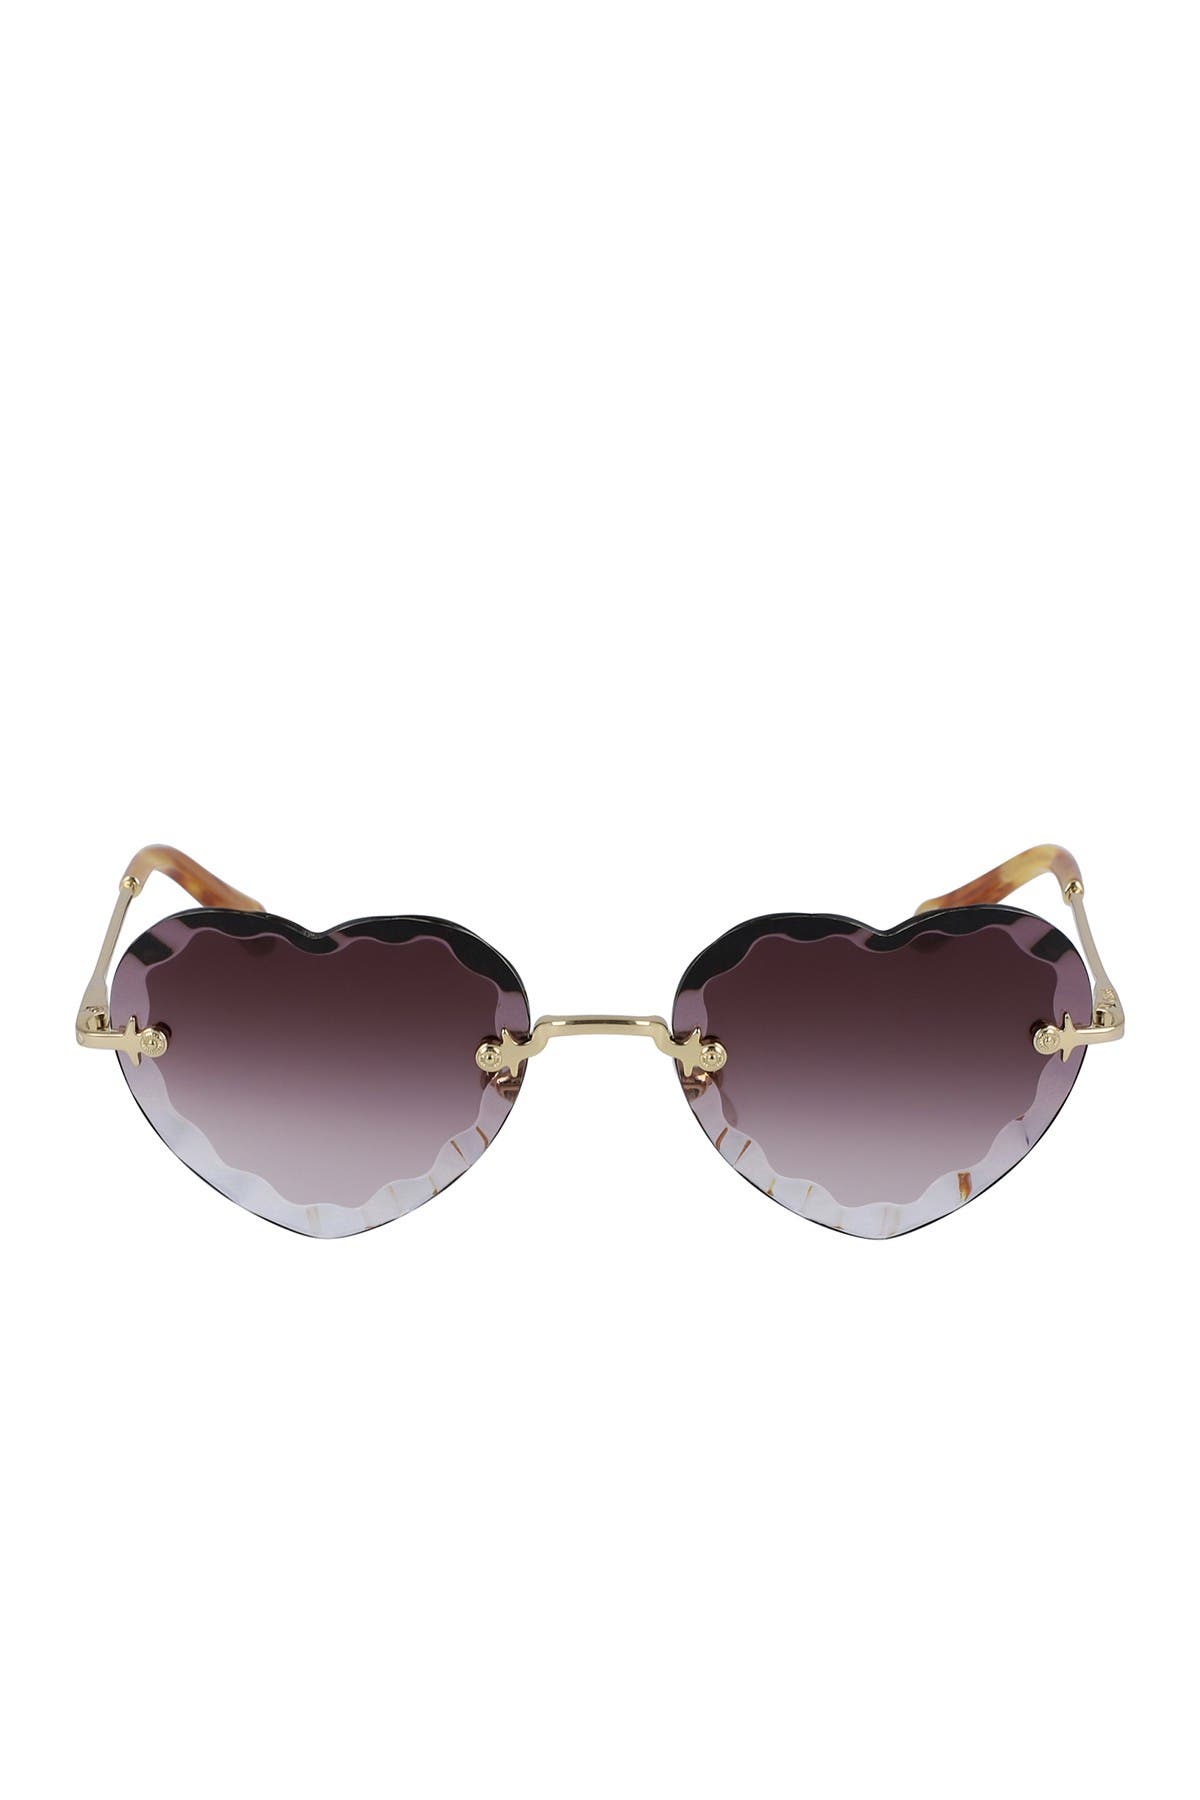 Chloé Rosie 55mm Scalloped Heart Sunglasses In Gold/gradient Wine